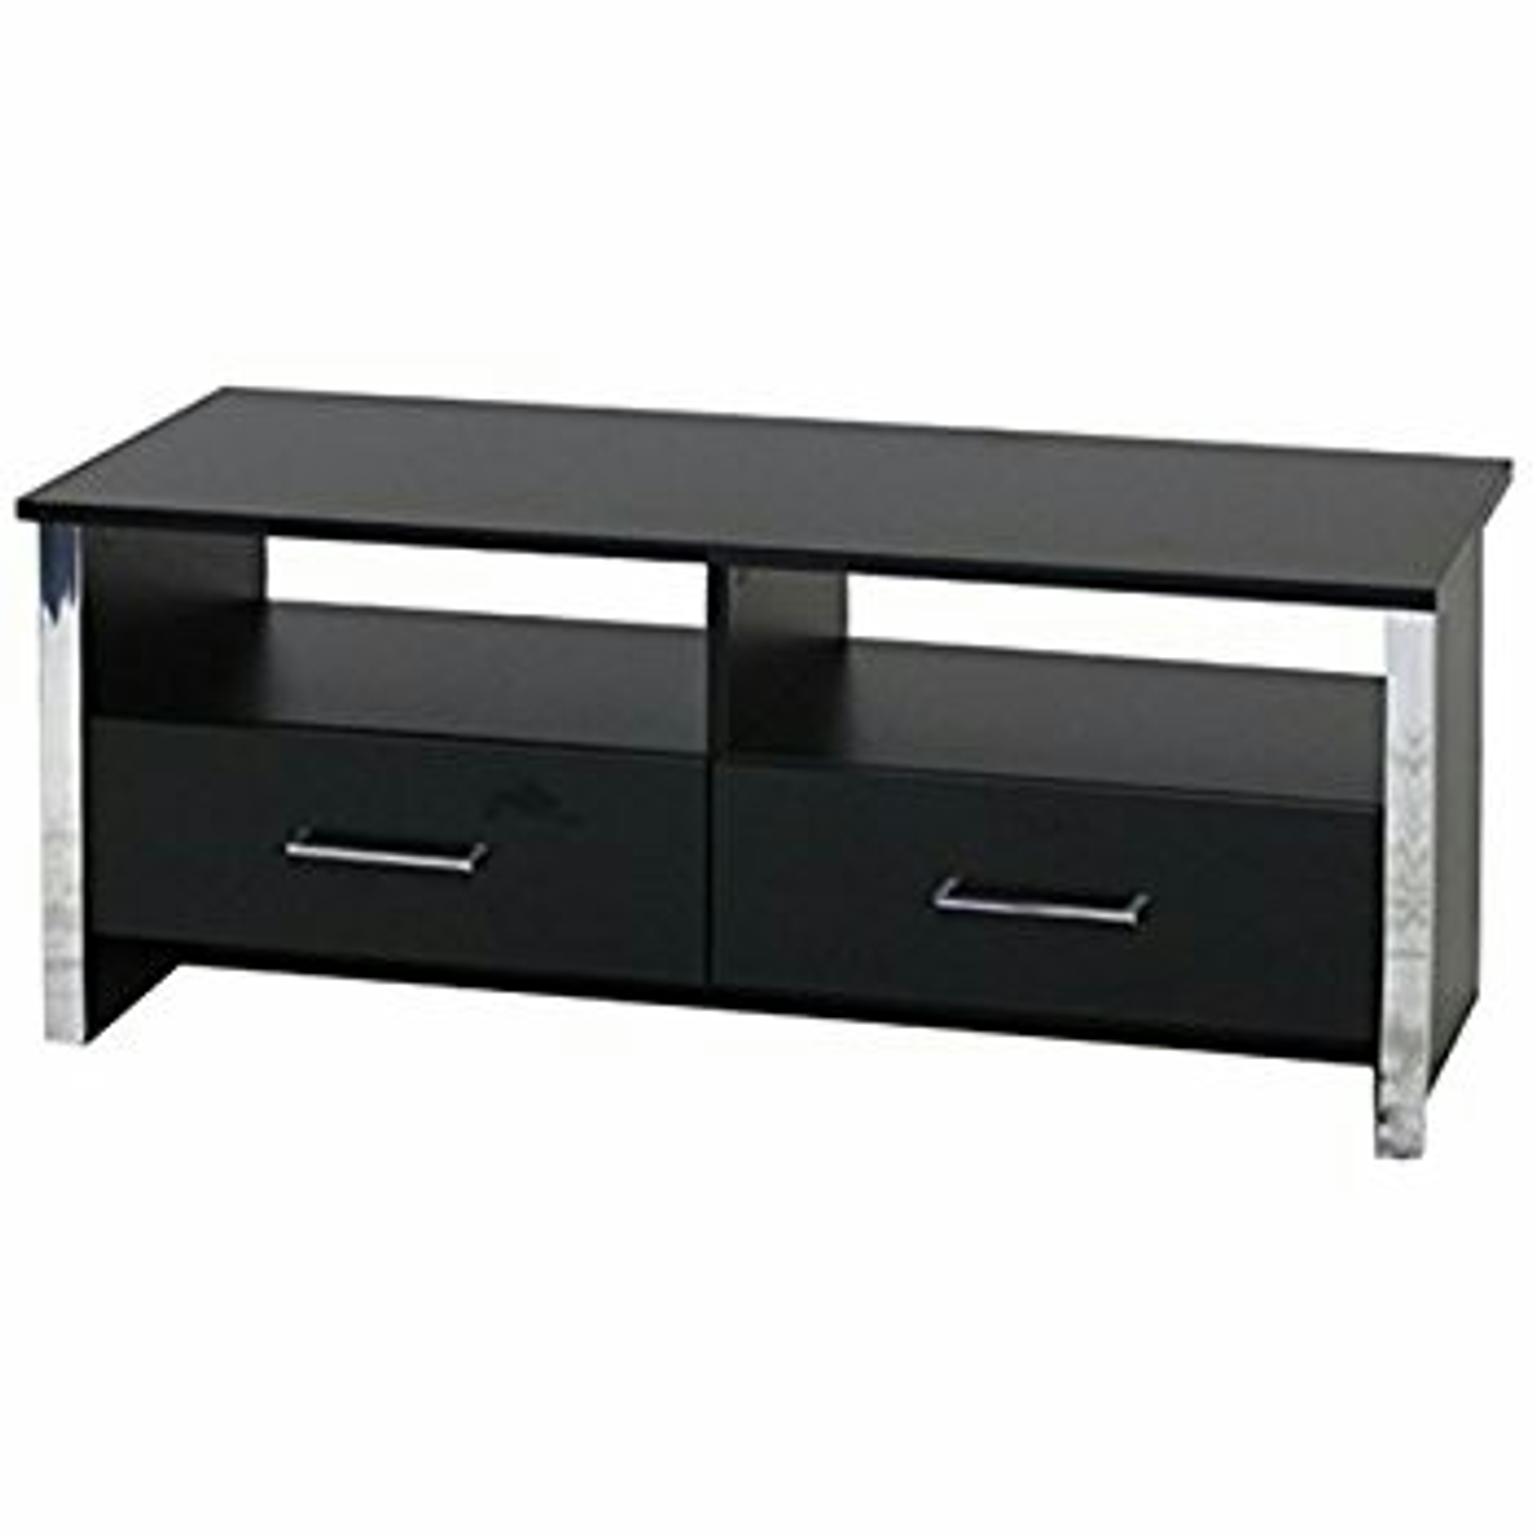 Black Tv Cabinet With Chrome Trim 2 Drawers In Wa8 Widnes For